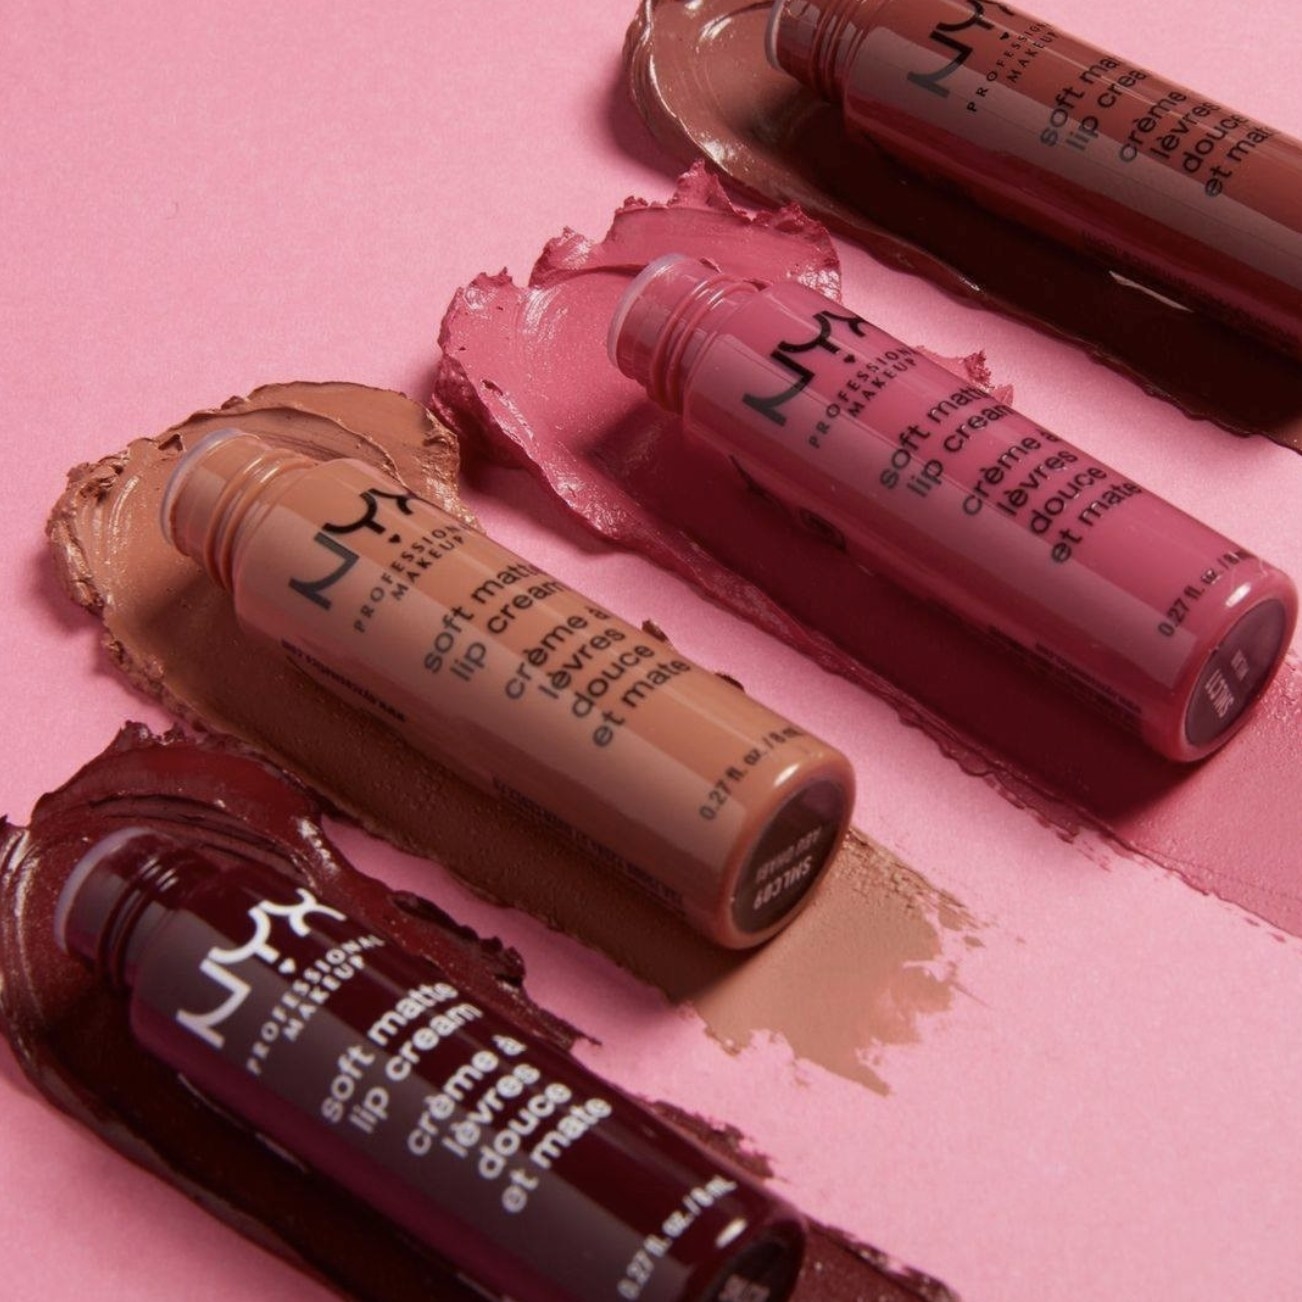 Bottles of NYX soft matte lip cream in four colors